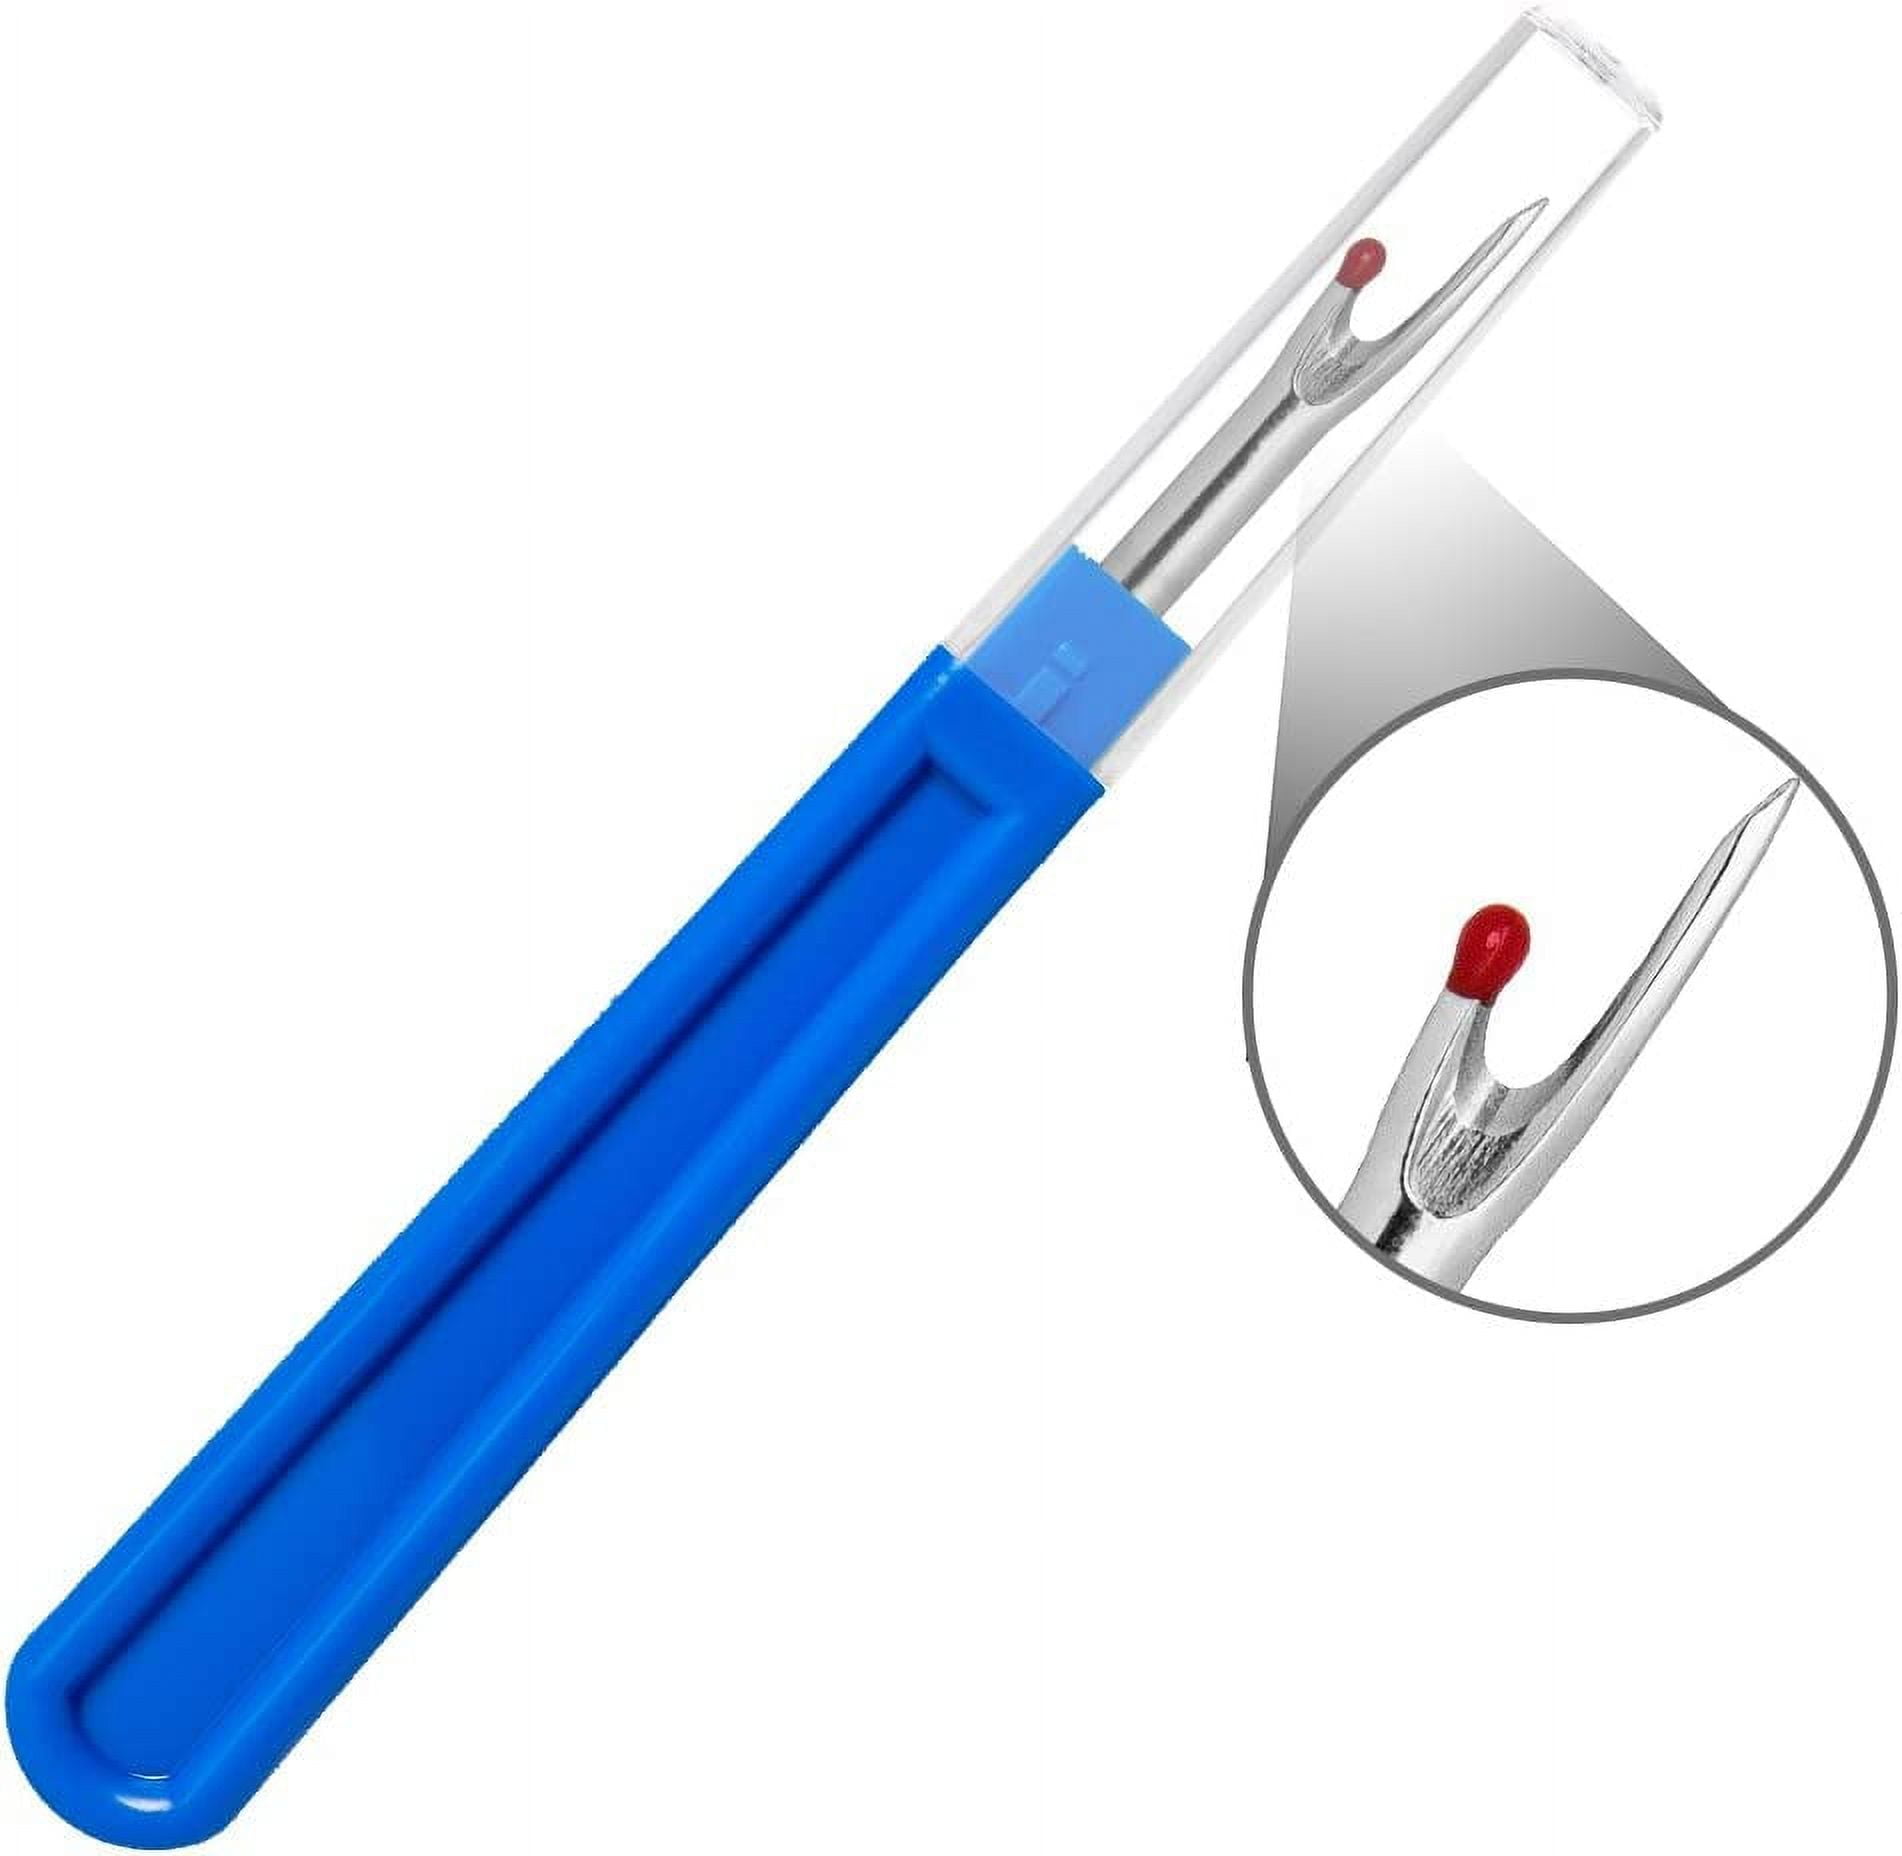 Ouyatoyu 24 Pieces Colorful Seam Ripper Tool Handy Stitch Ripper Sewing Ripper for Opening Removing Seams and Hems